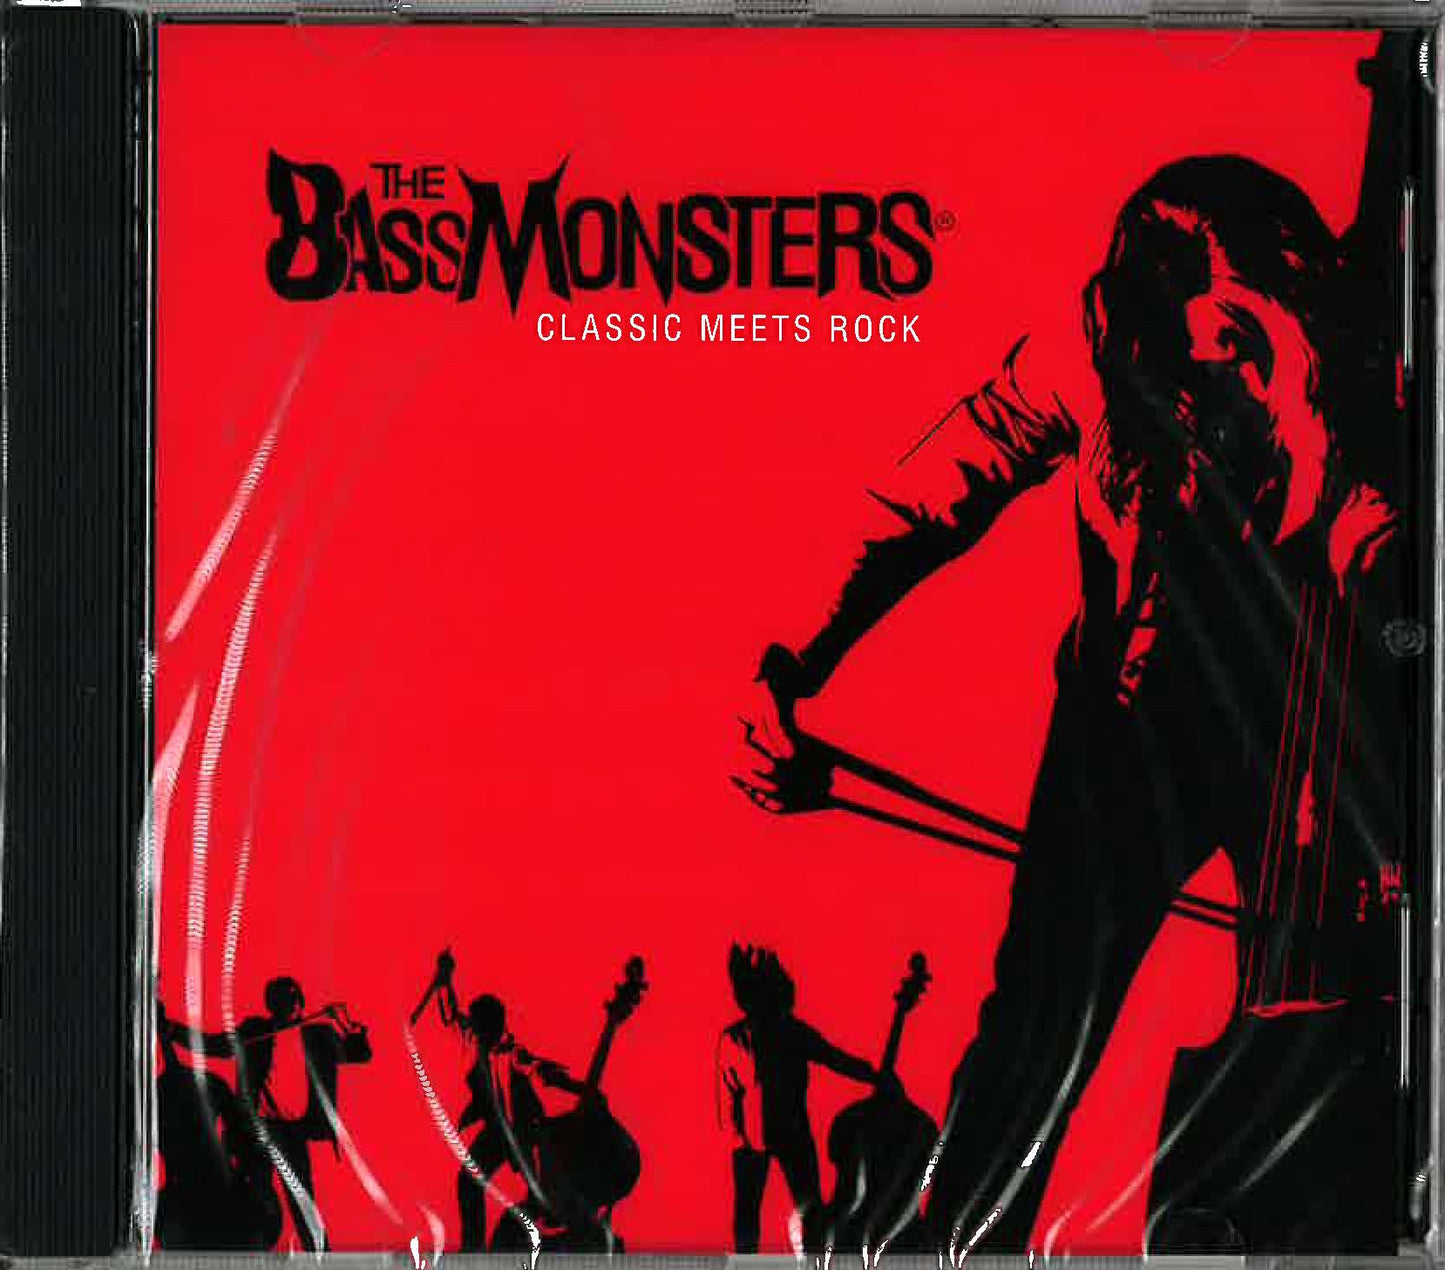 The Bass Monsters: Classic Meets Rock